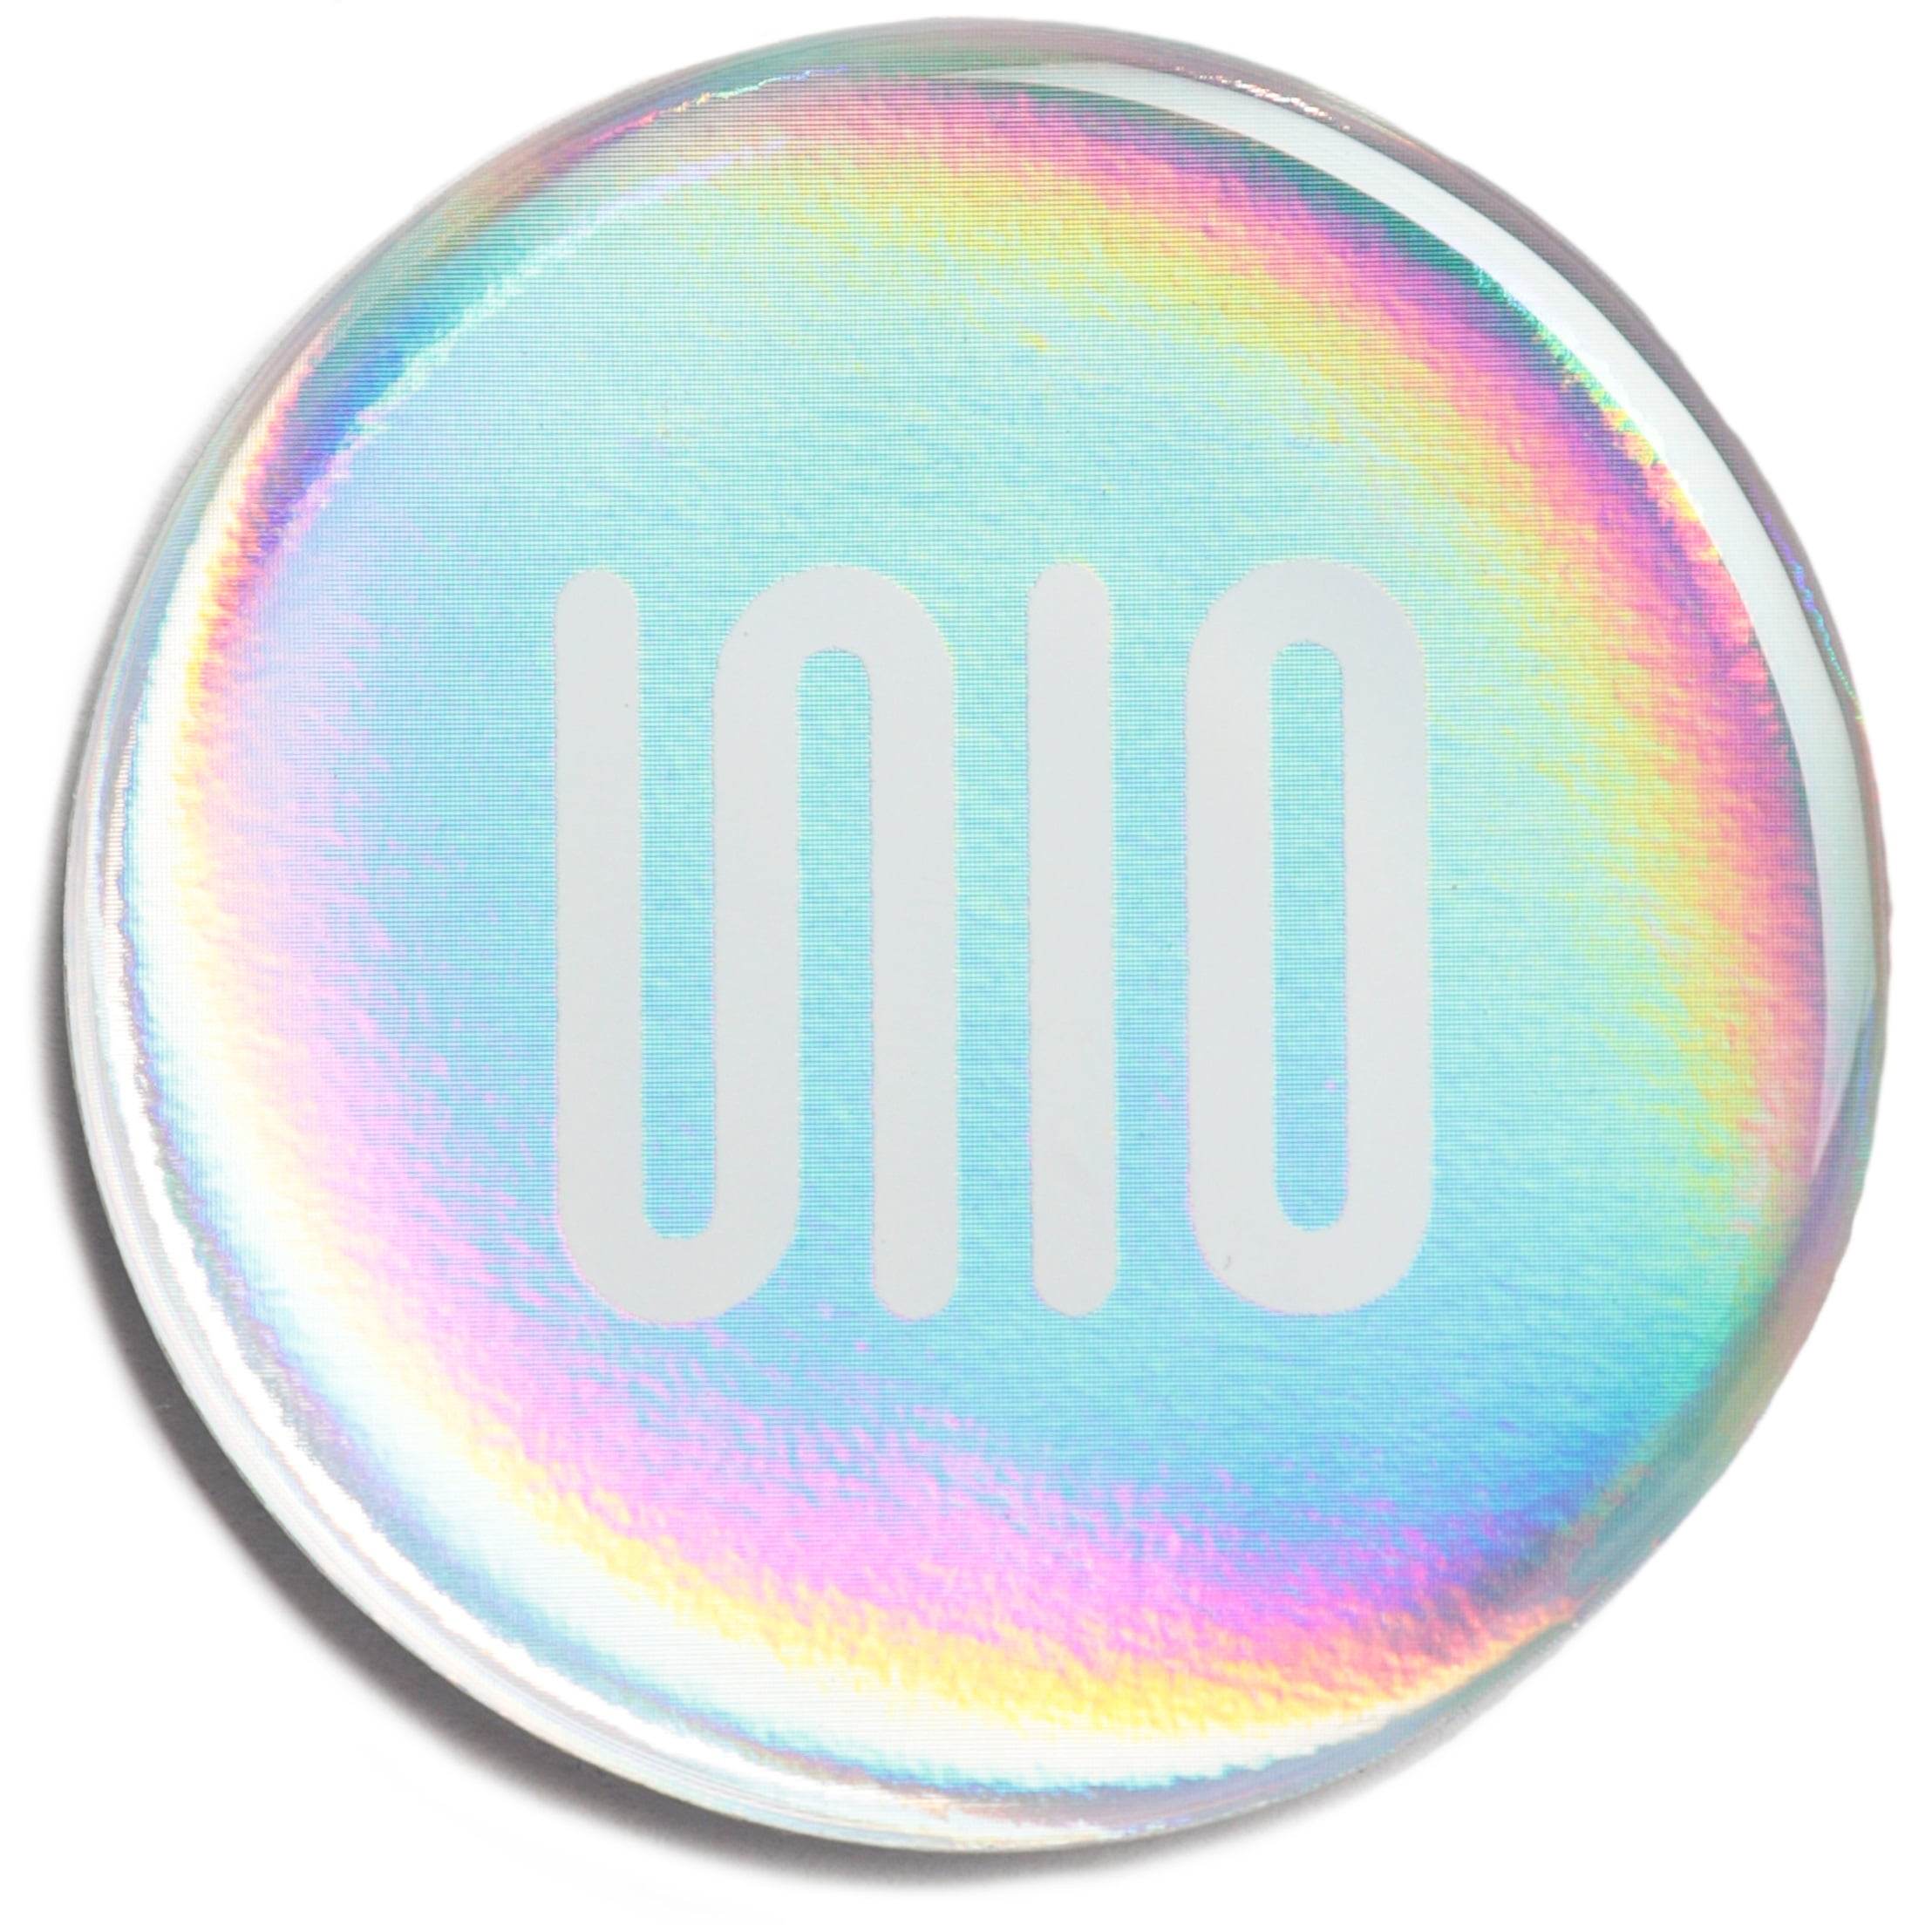 UNIO NFC Tag, Digital Information Sharing and Phone Accessory, Holographic